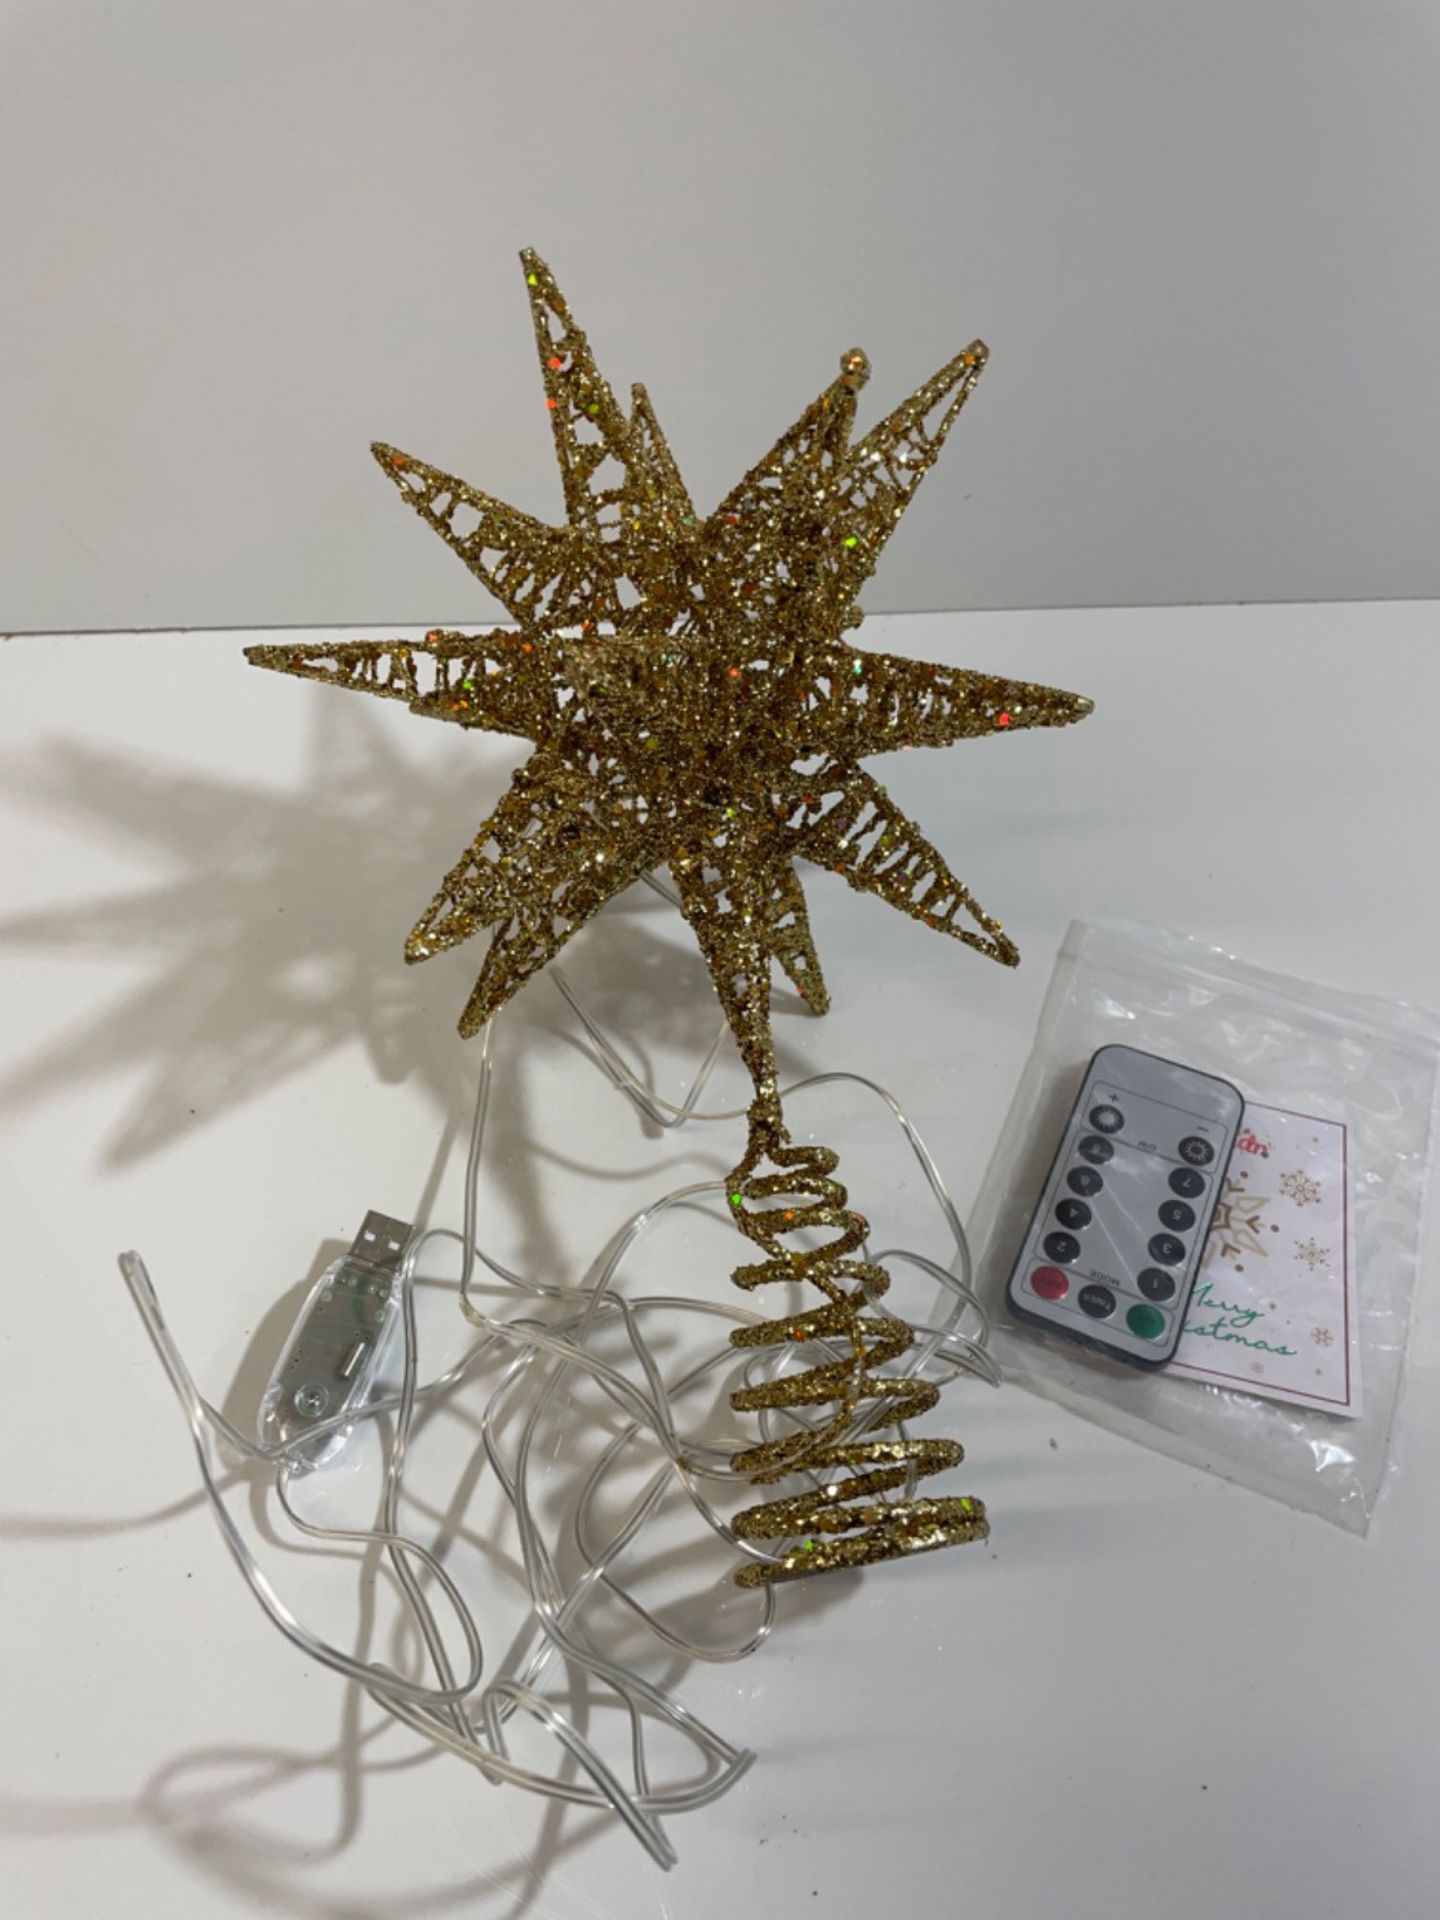 Lewondr Christmas Star Tree Topper, 3D Geometric Star USB Powered Remote Controlled Treetop Star wi - Image 2 of 3